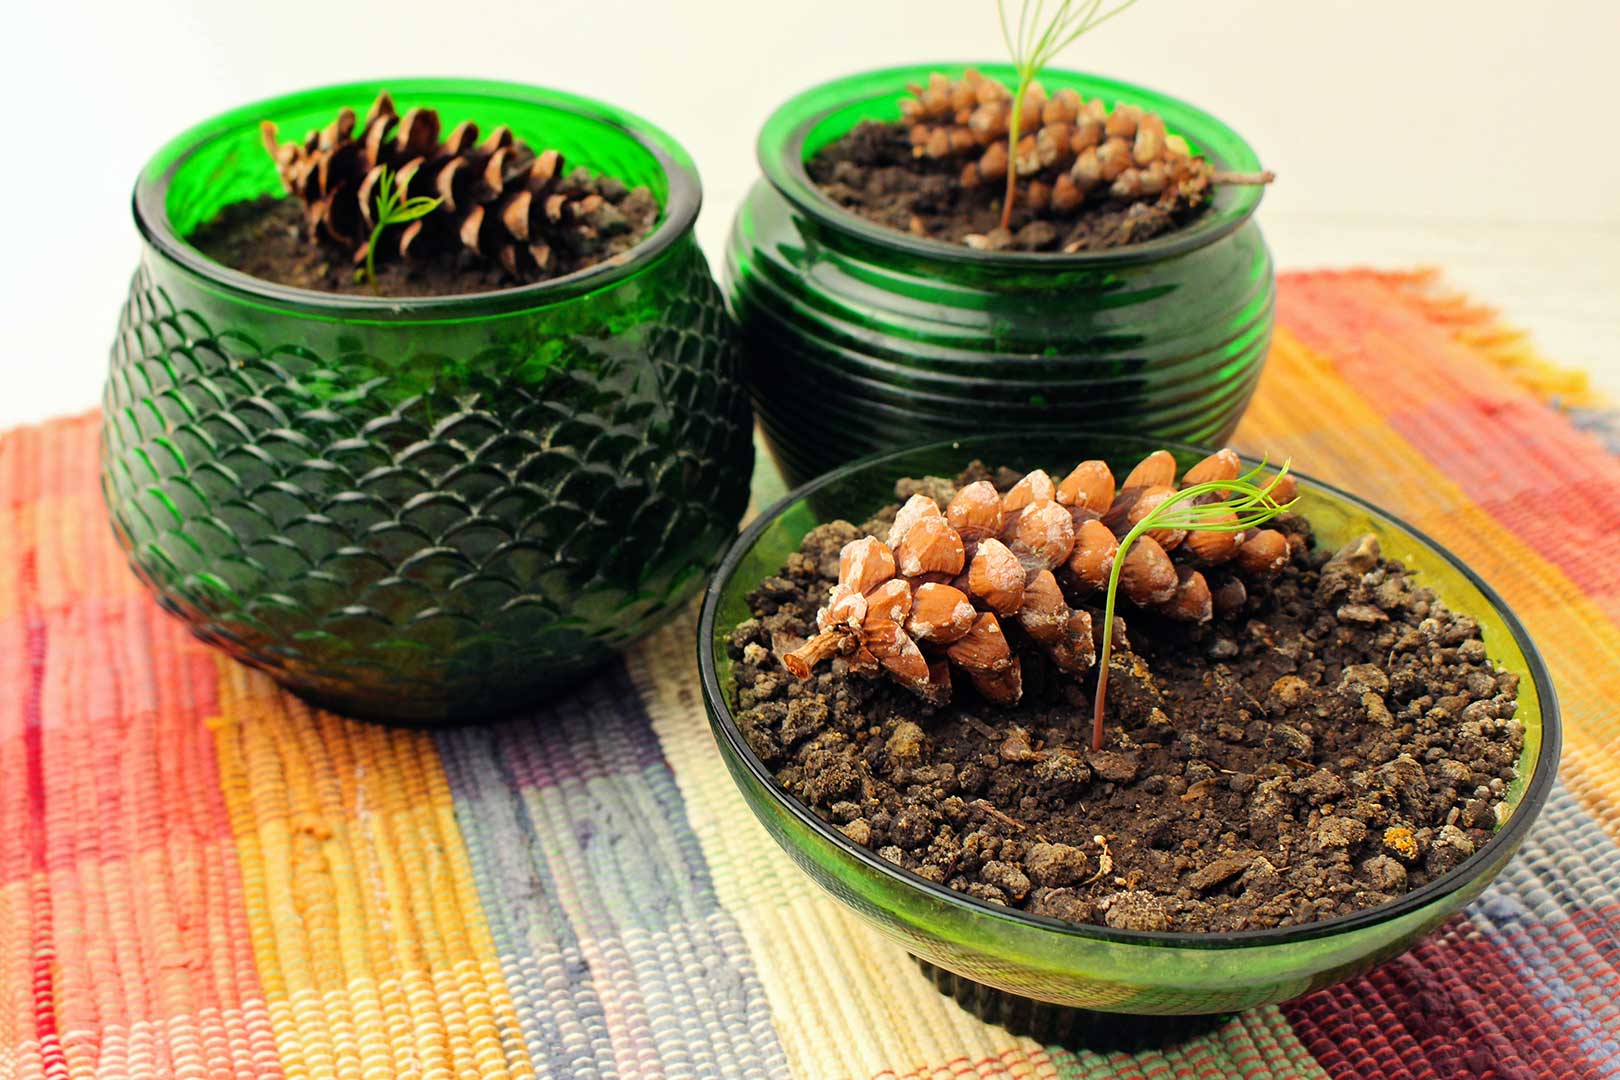 Three completed and sprouting trees with pinecones in green glass pots resting on plaid place mat.
